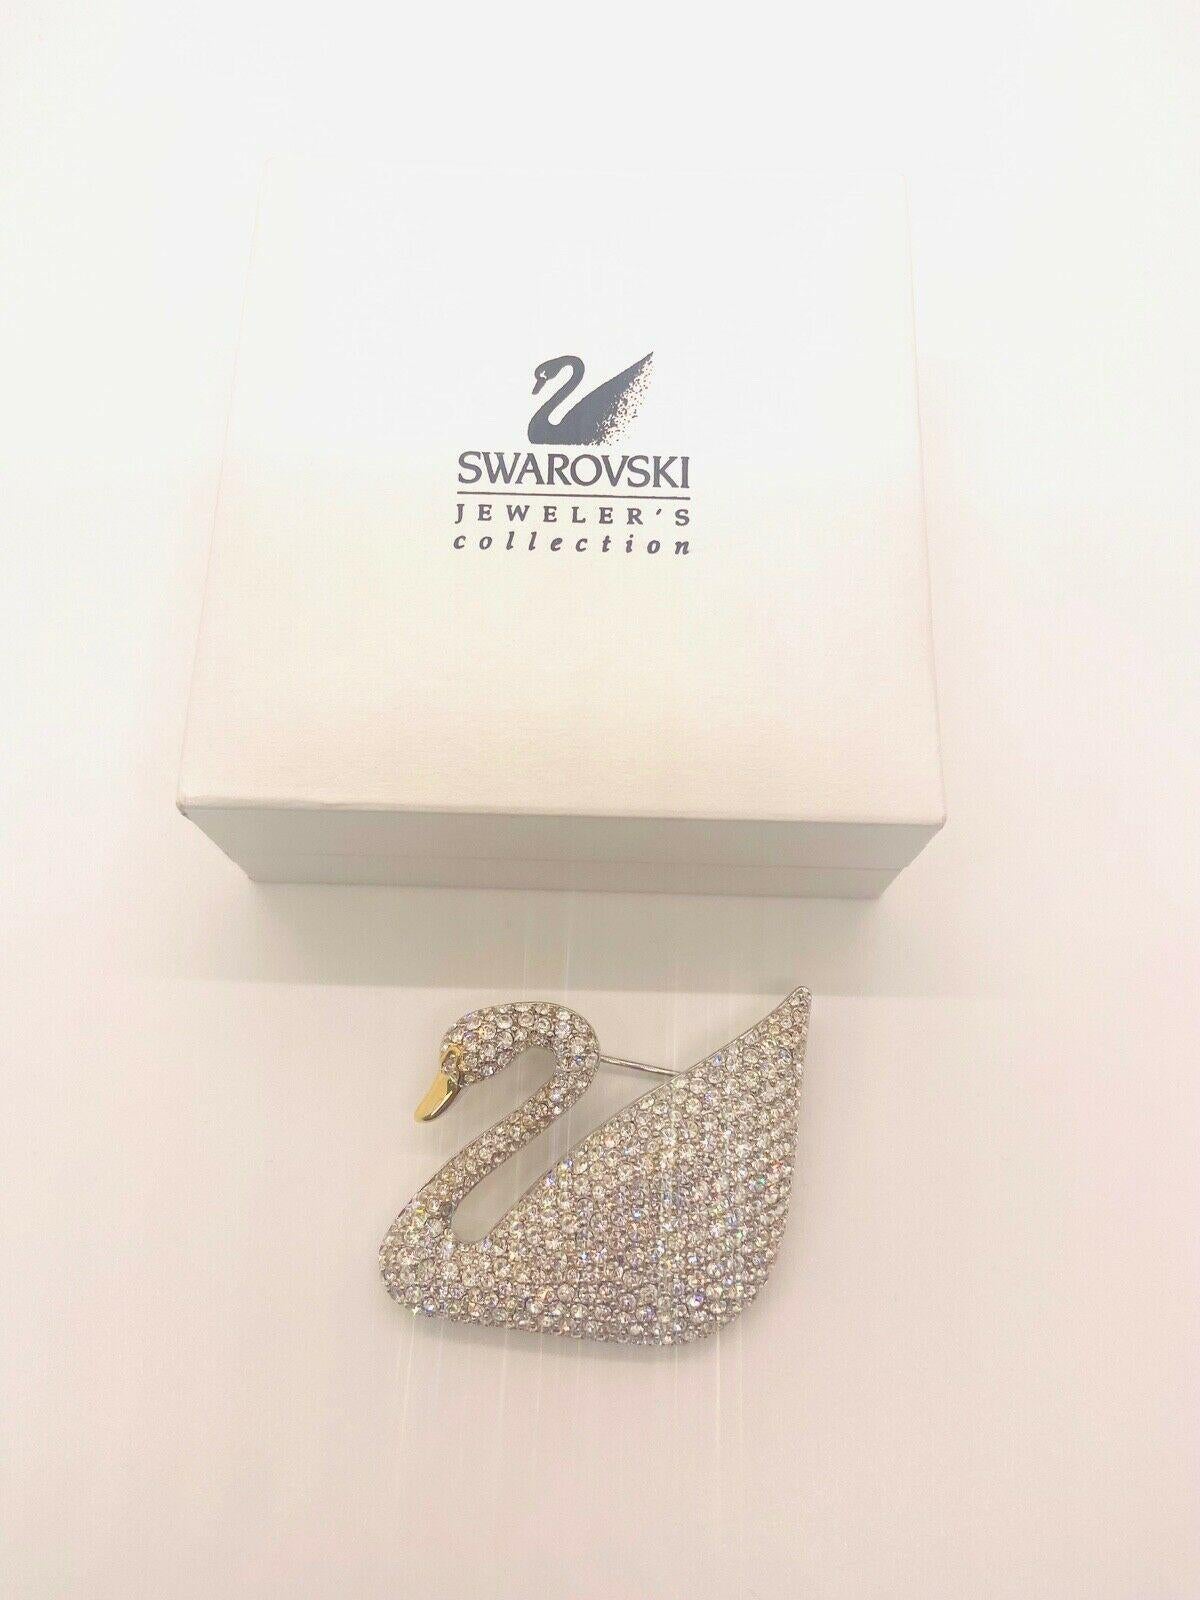 Modern Swarovski Crystal Swan Brooch/ Pin, Signed and Retired For Sale